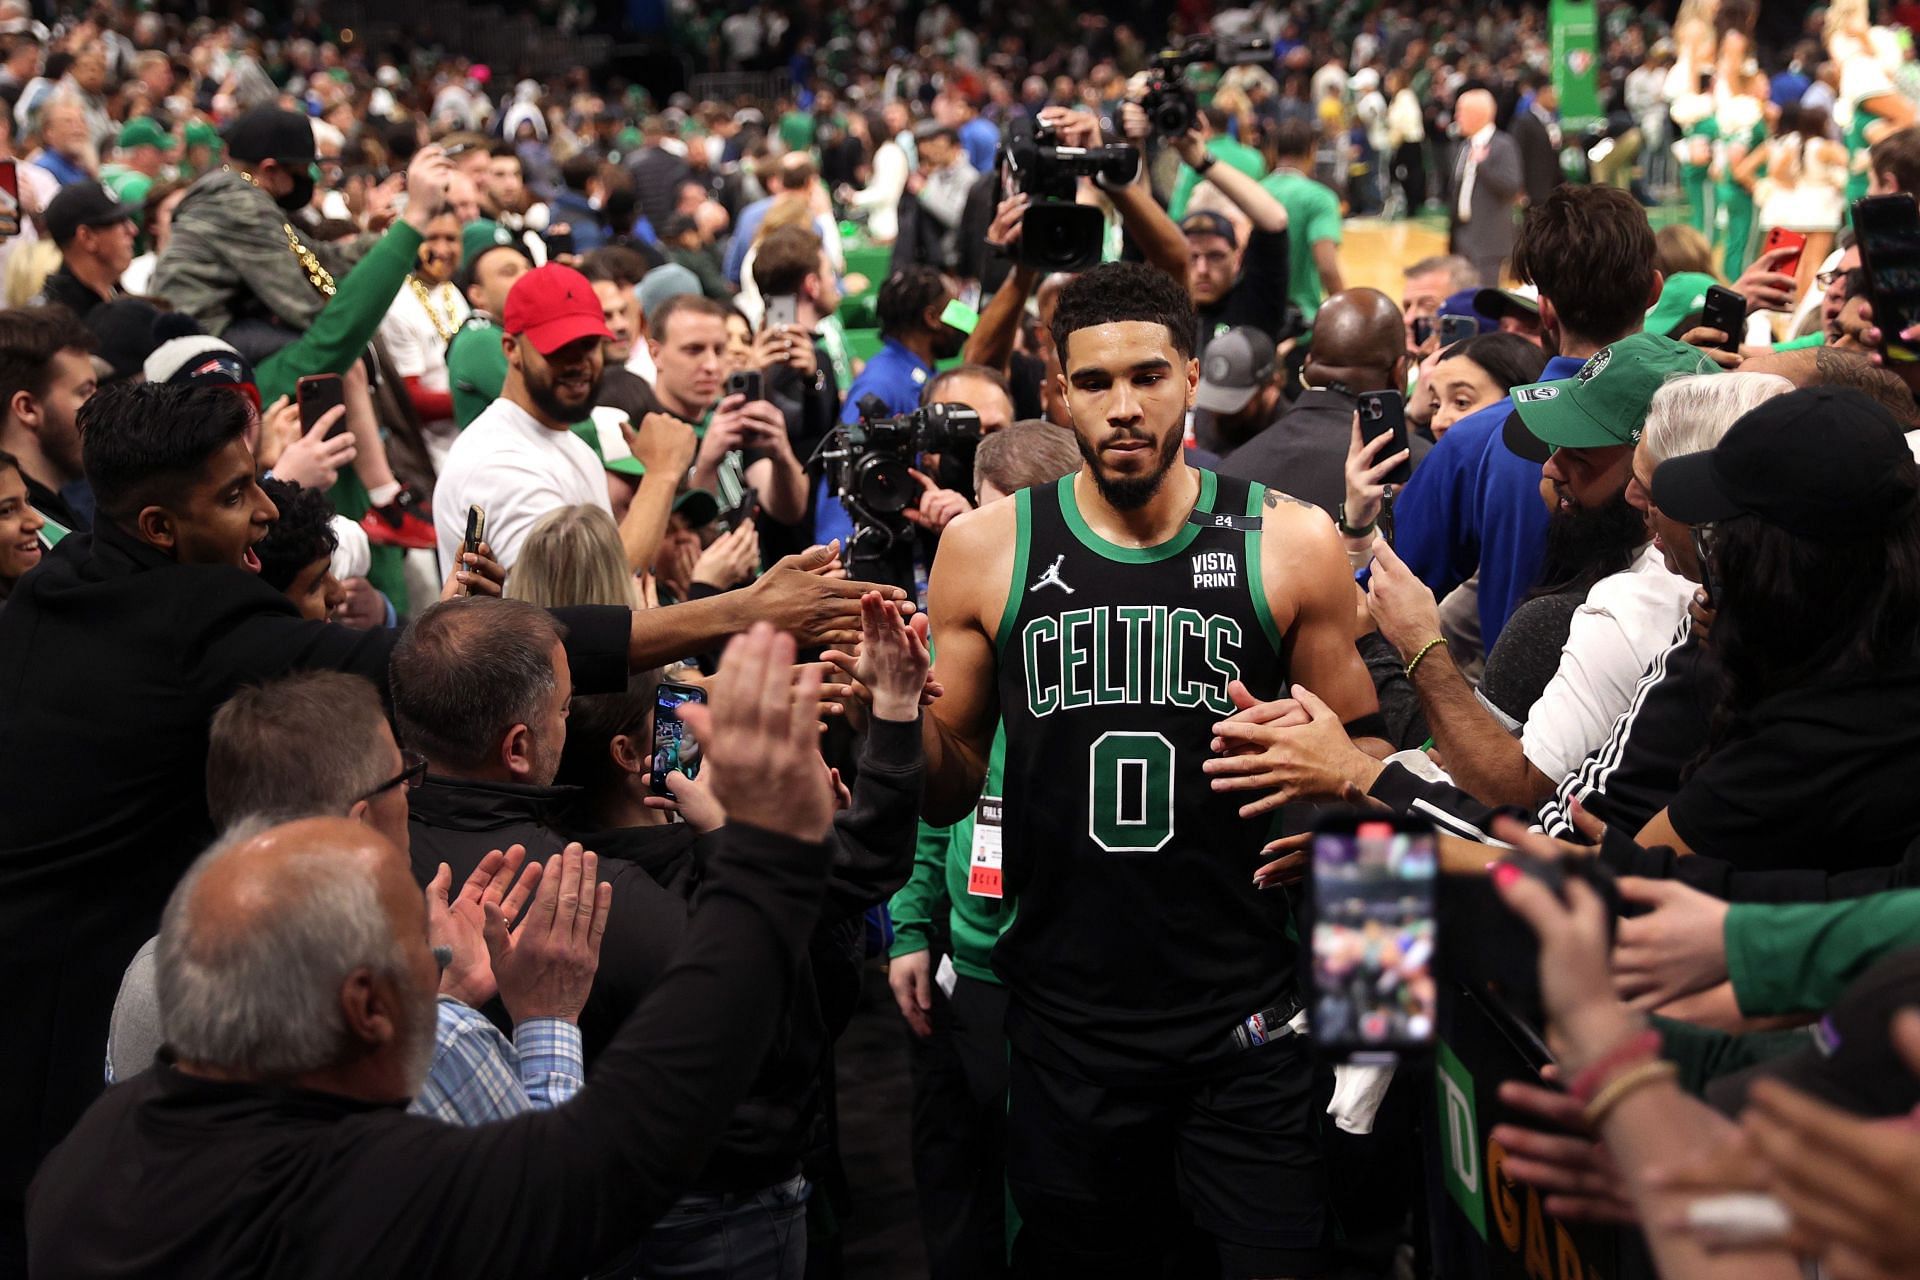 Celtics fans were loud and hostile during their team&#039;s win.